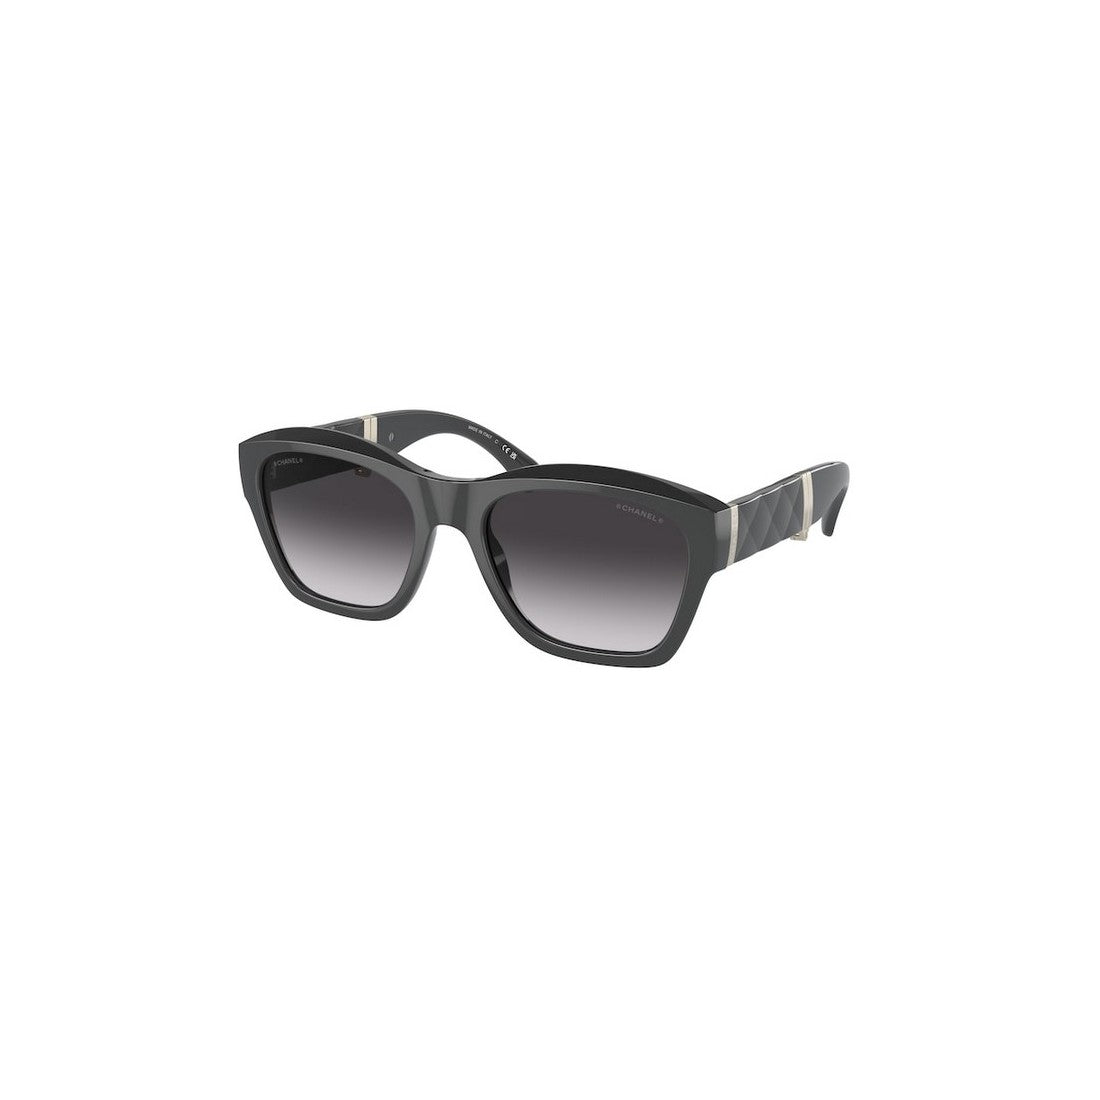 CHANEL Stylish Black Sunglasses for Women - Chic and Sophisticated Design